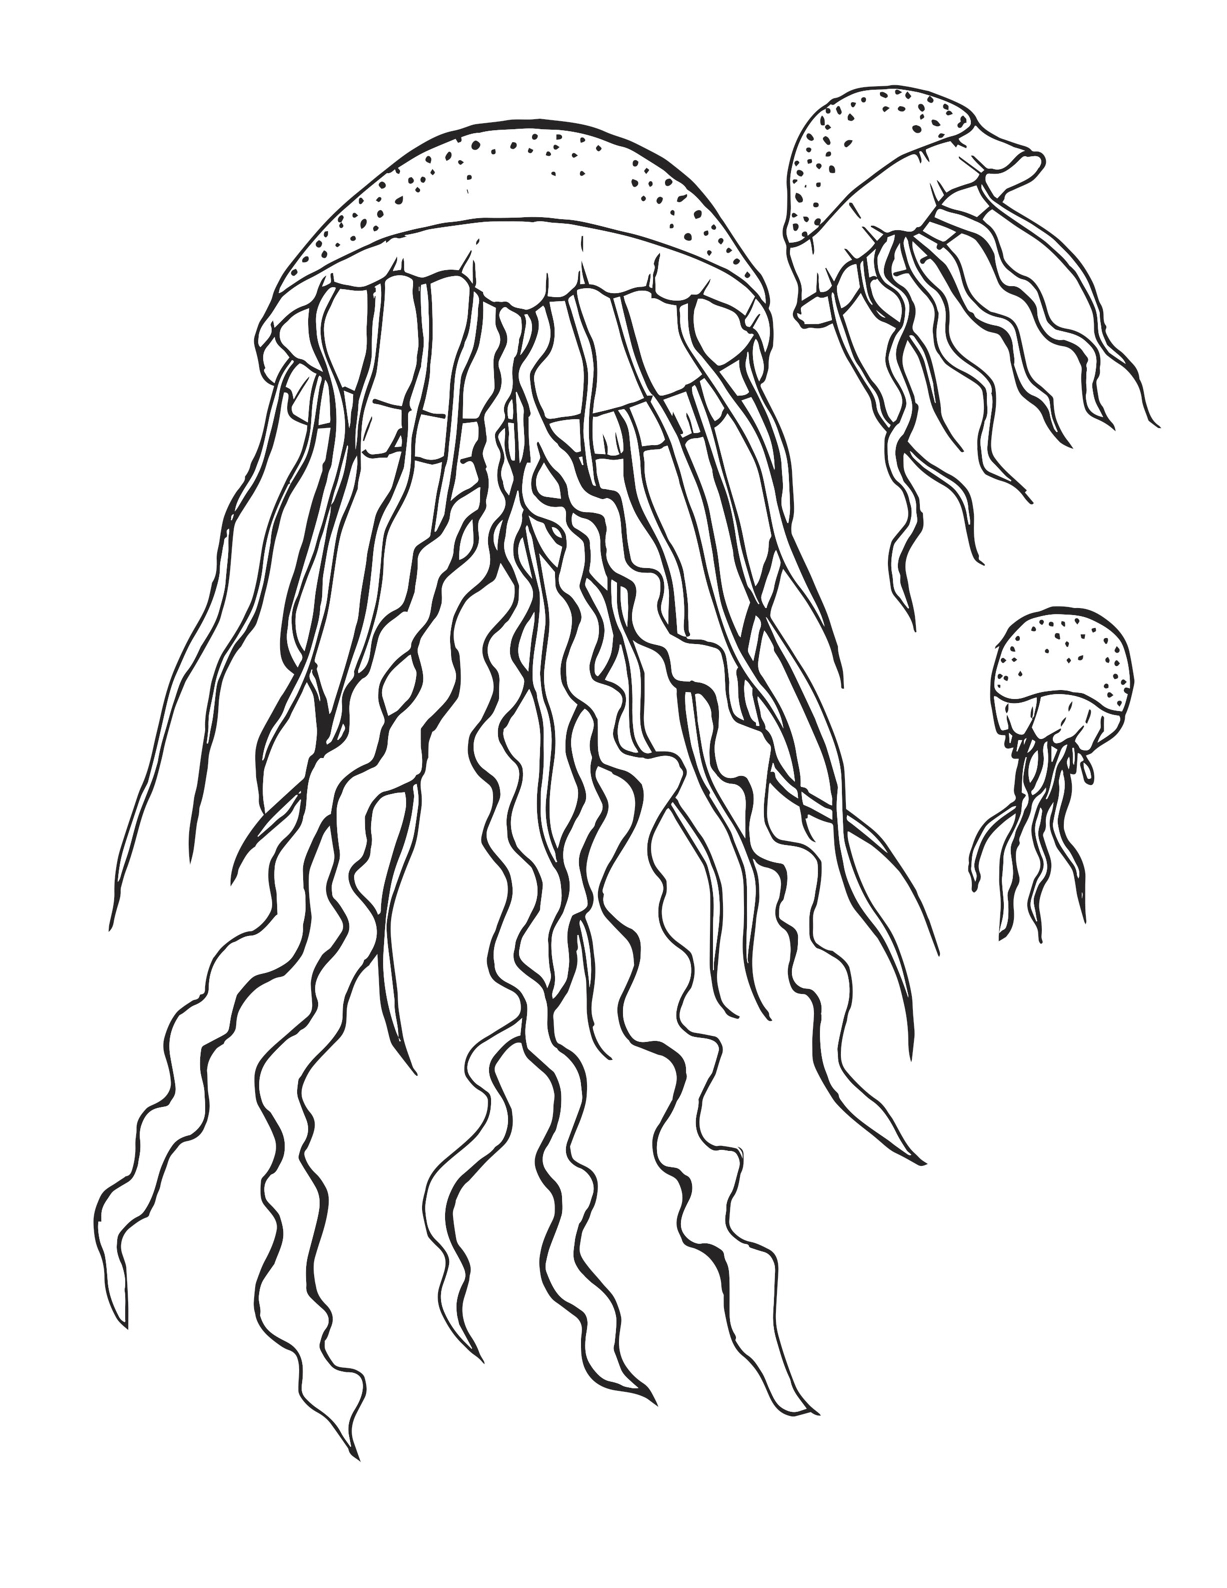 Three Jelly Fish Floating Coloring Page